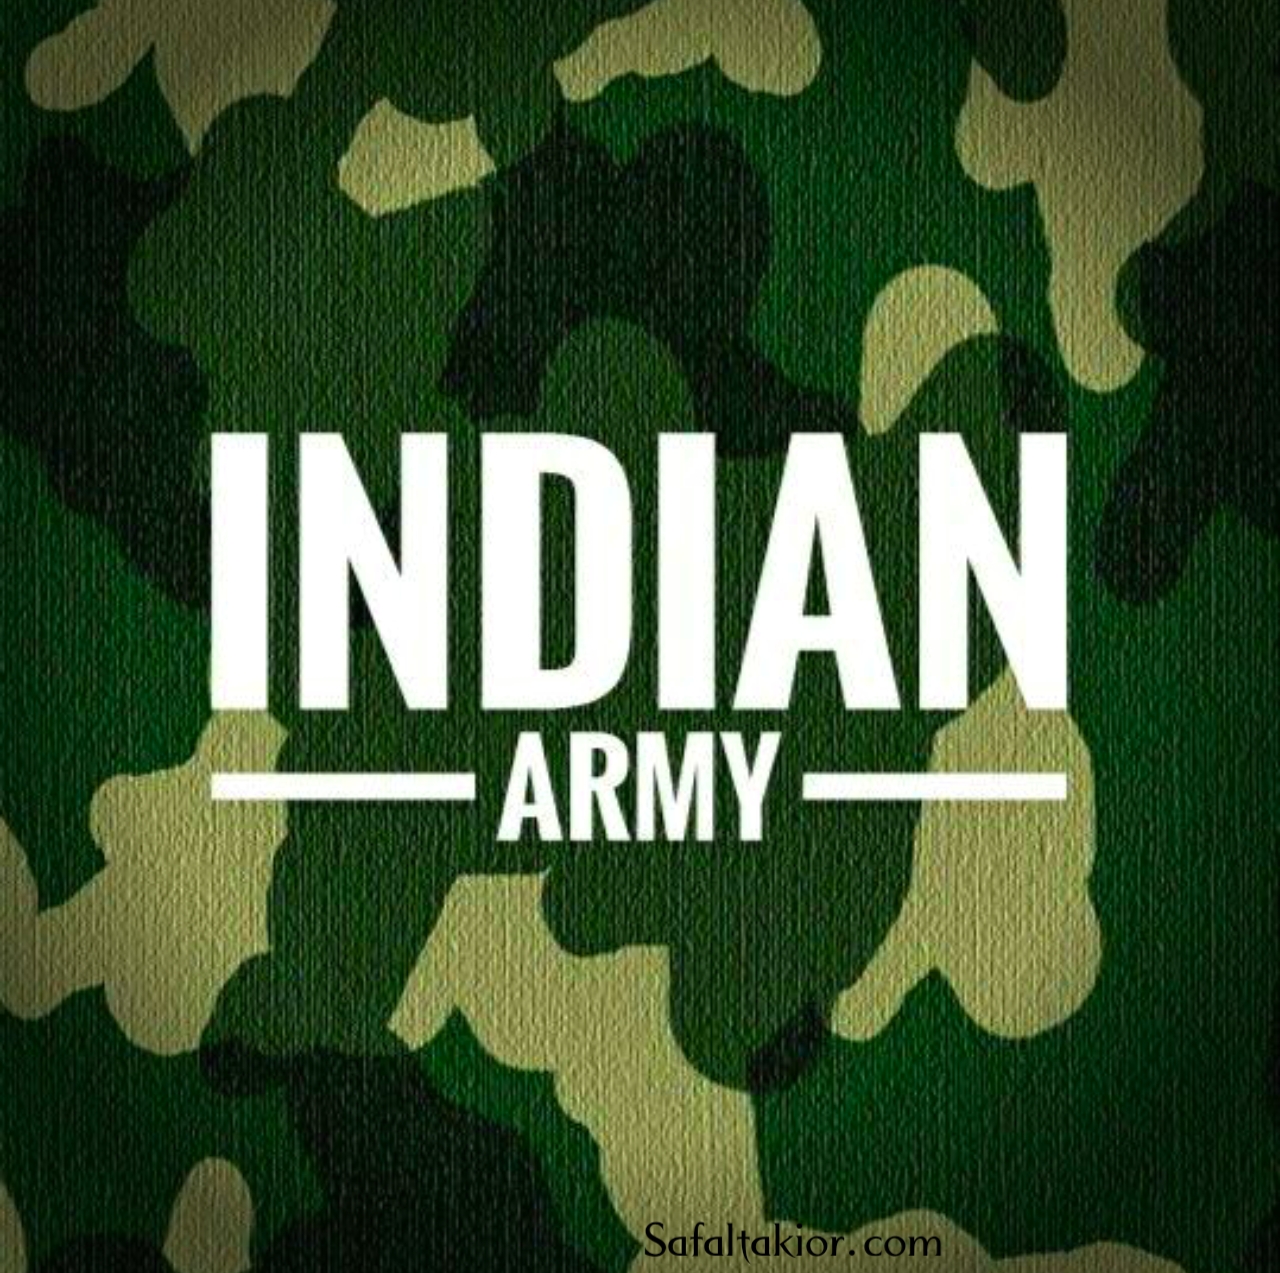 India army lover dp